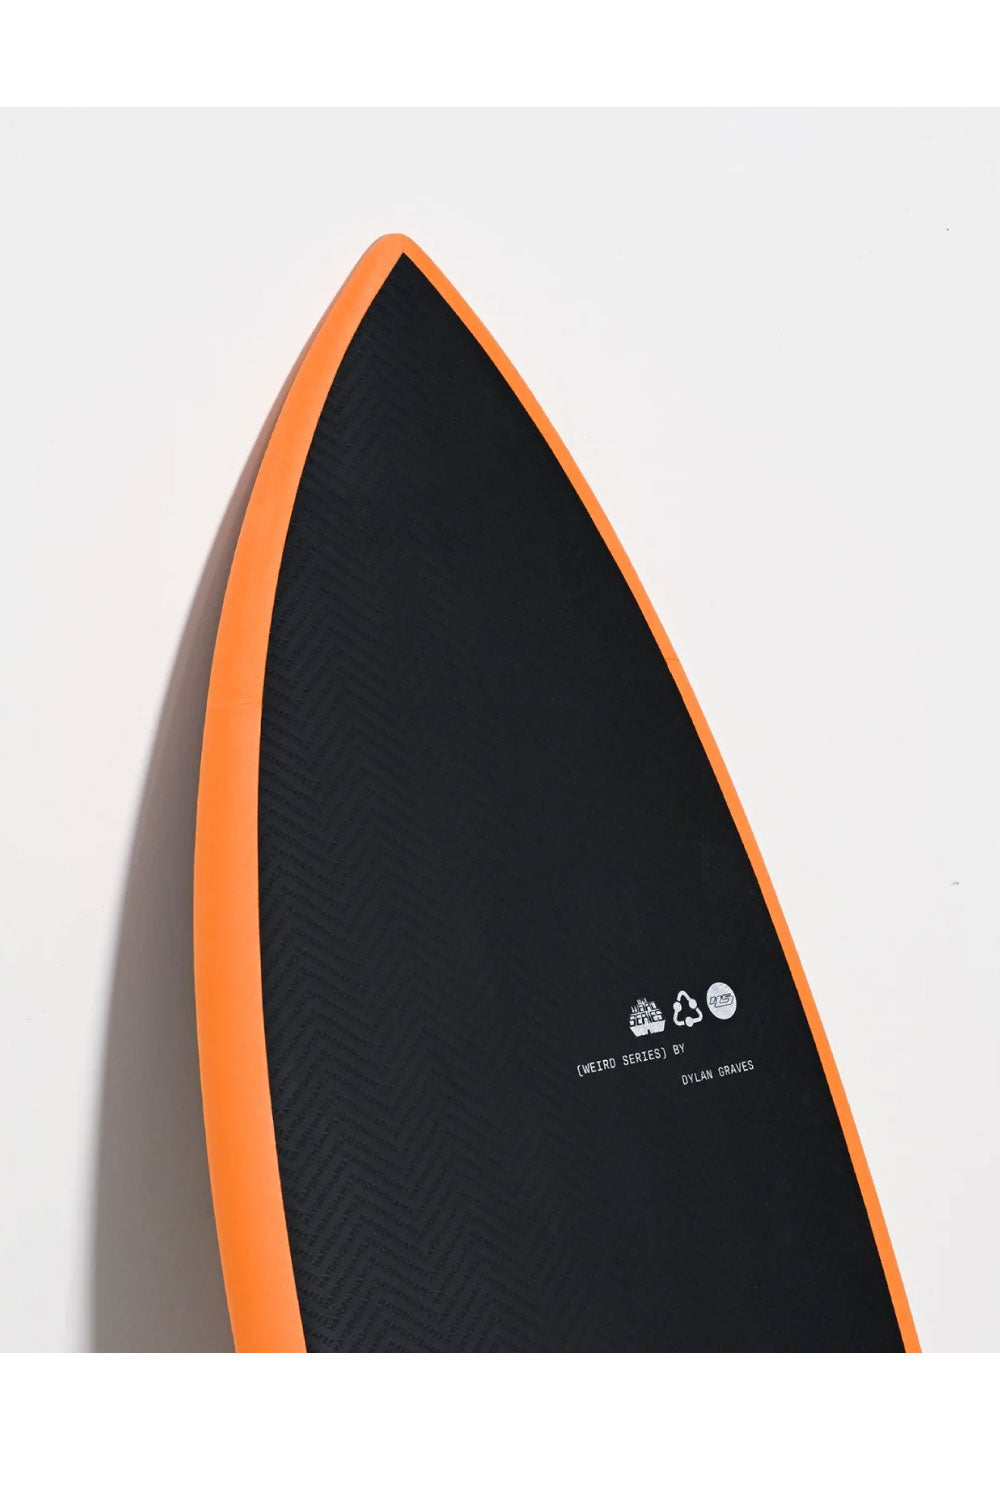 Hayden Shapes Dylan Grave Weird Waves Softboard - Comes with fins